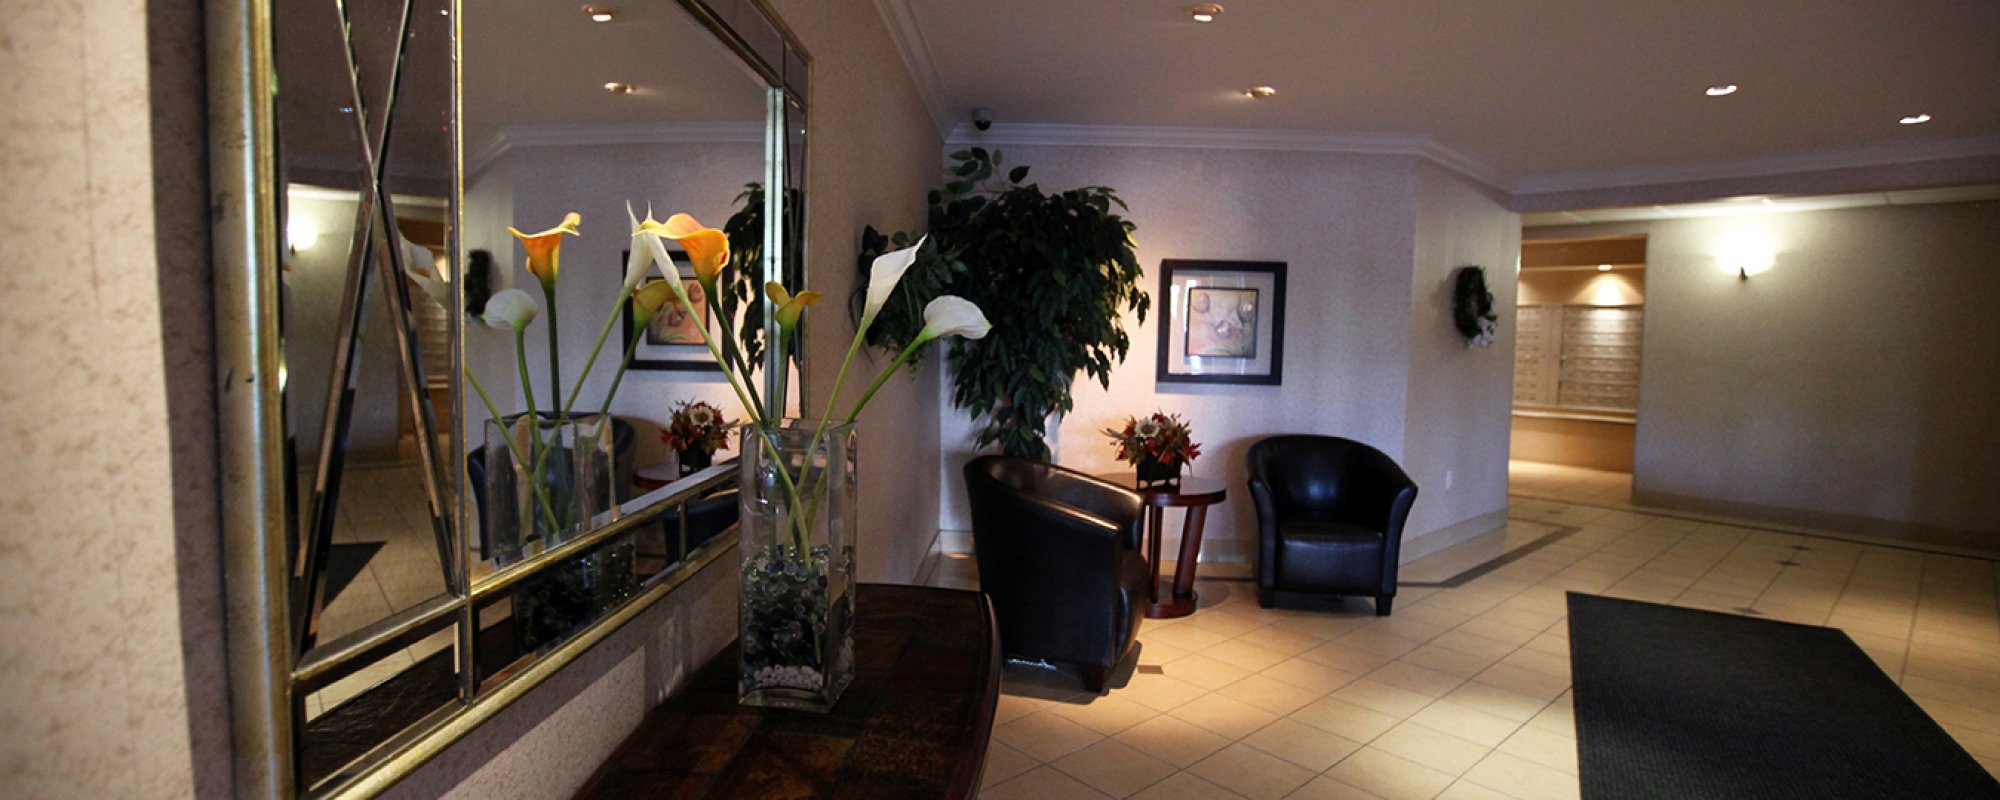 Lobby of residential apartment building in London, Ontario